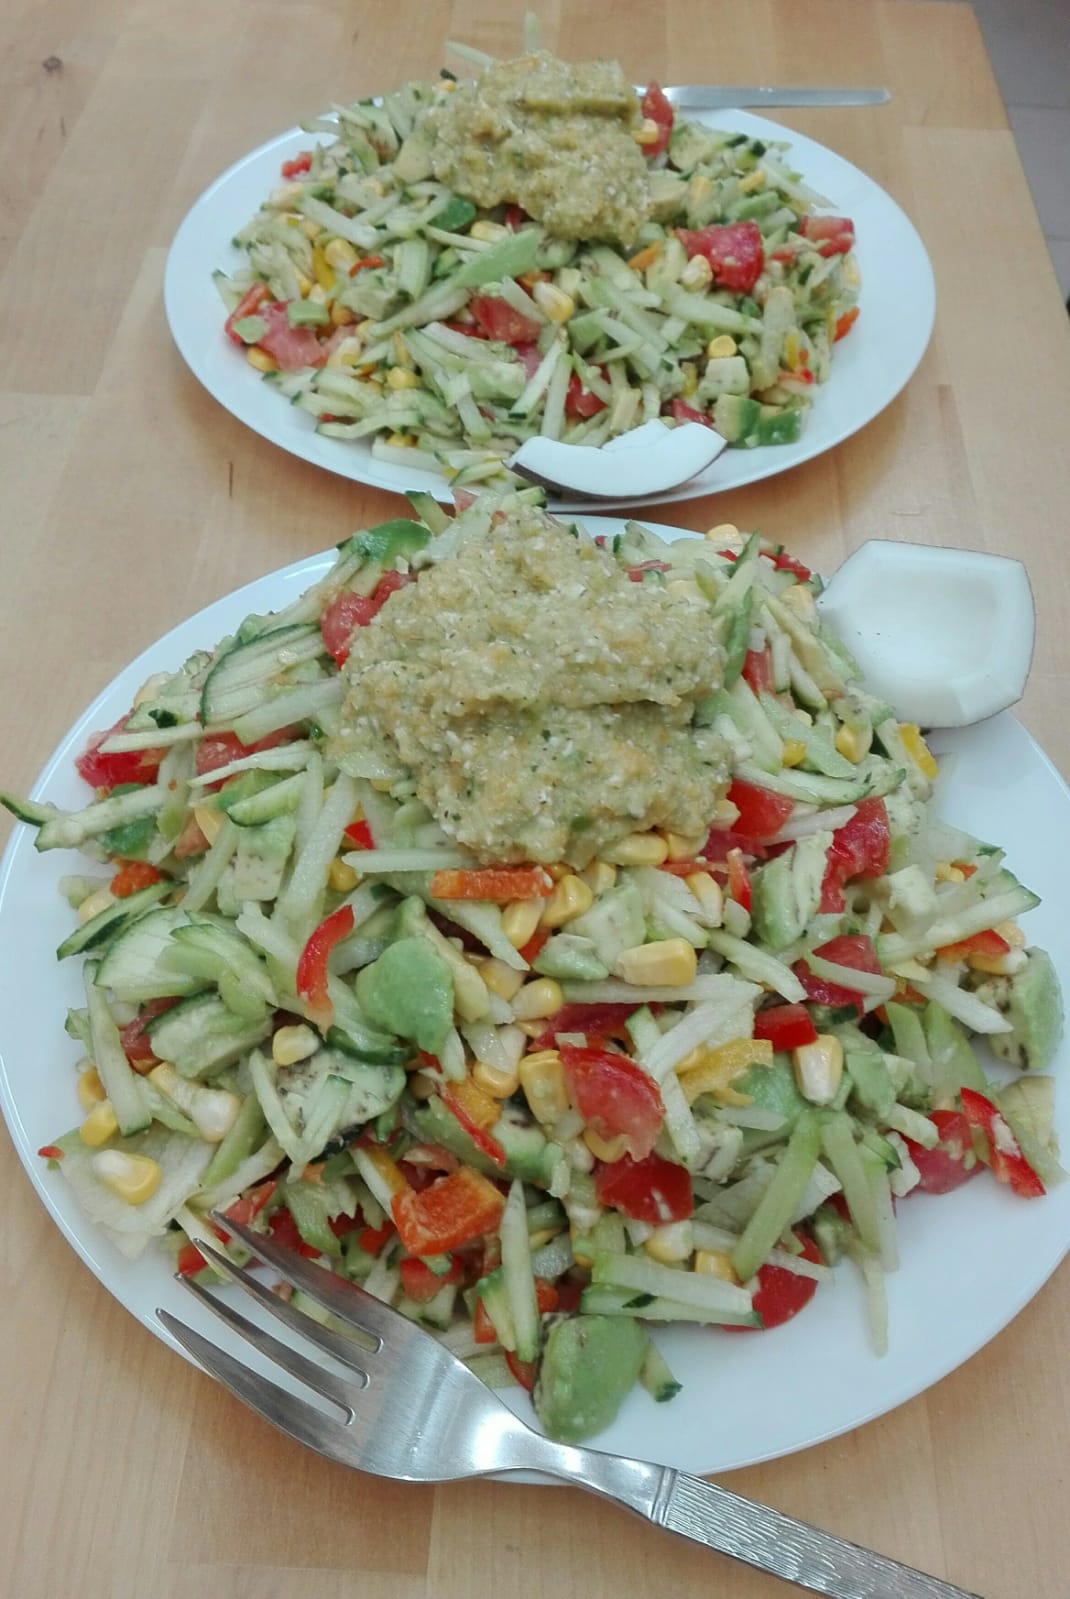 Vegetable Salad with Chutney2 View 1